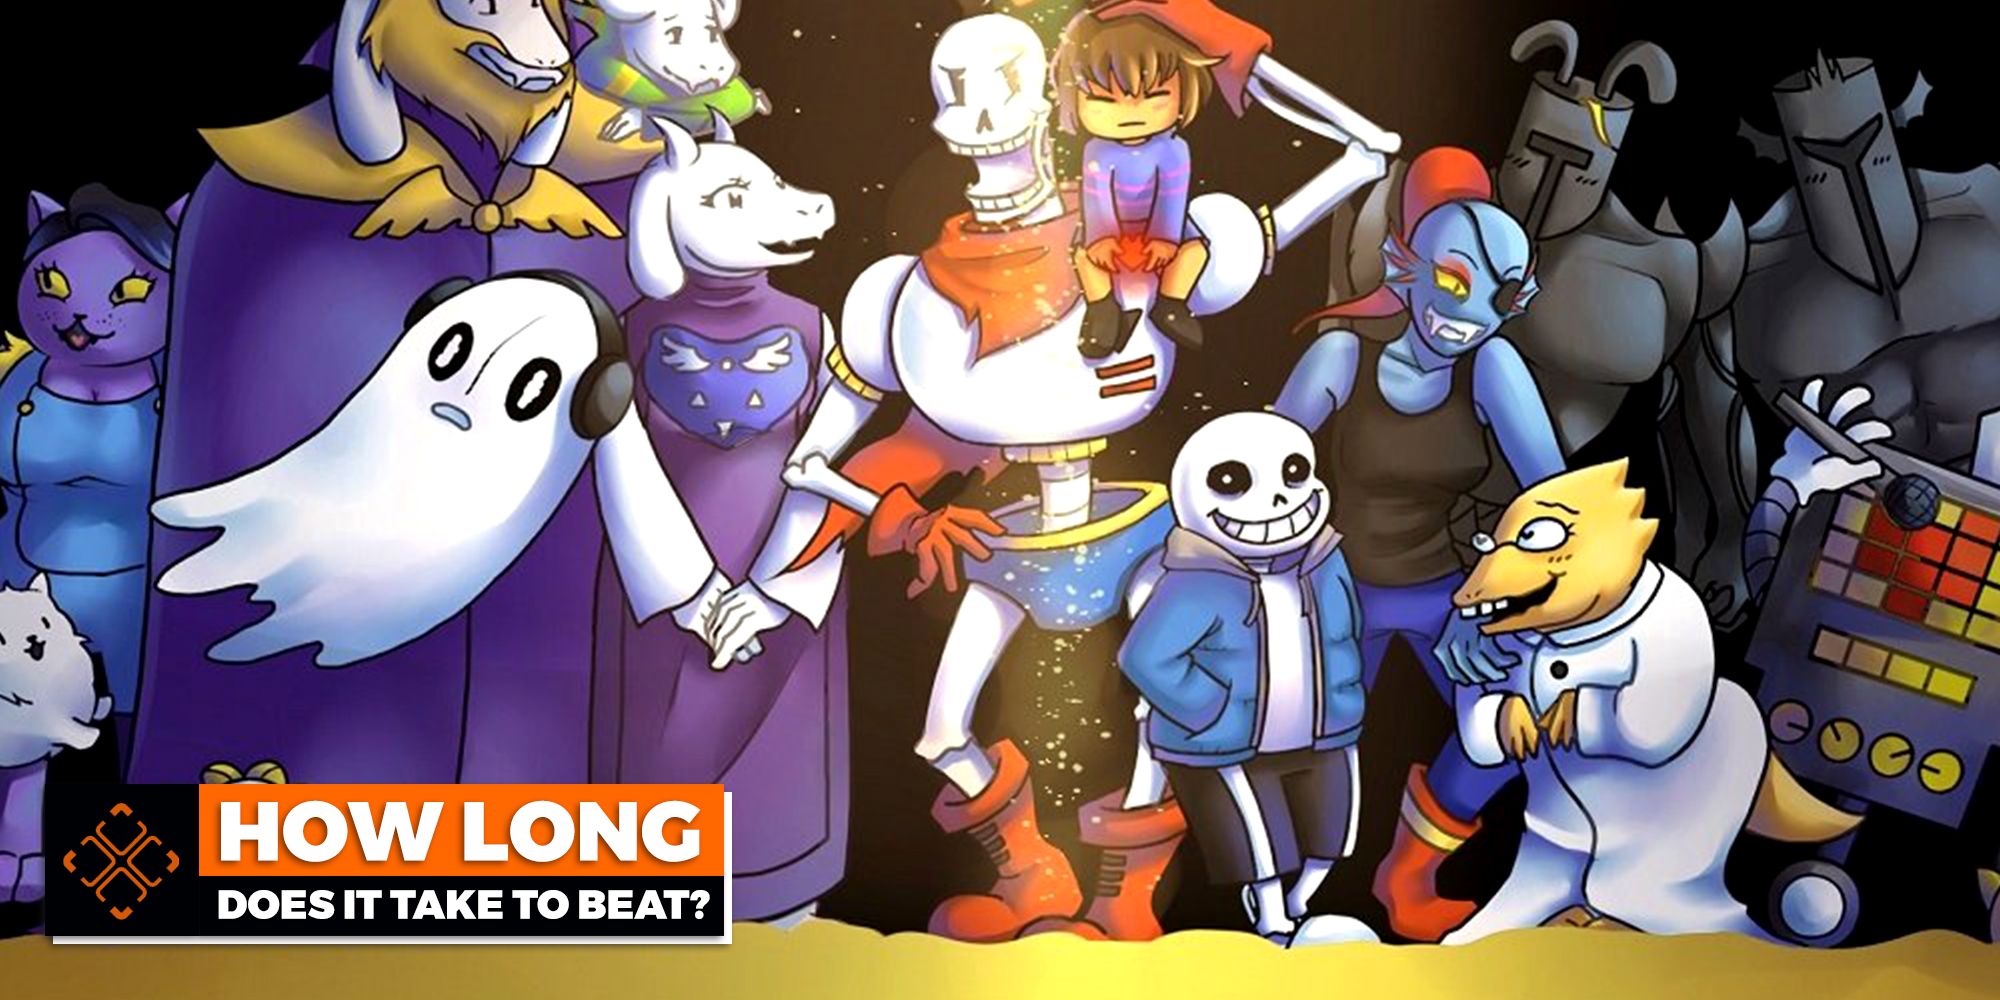 How Long Does It Take To Finish Undertale?